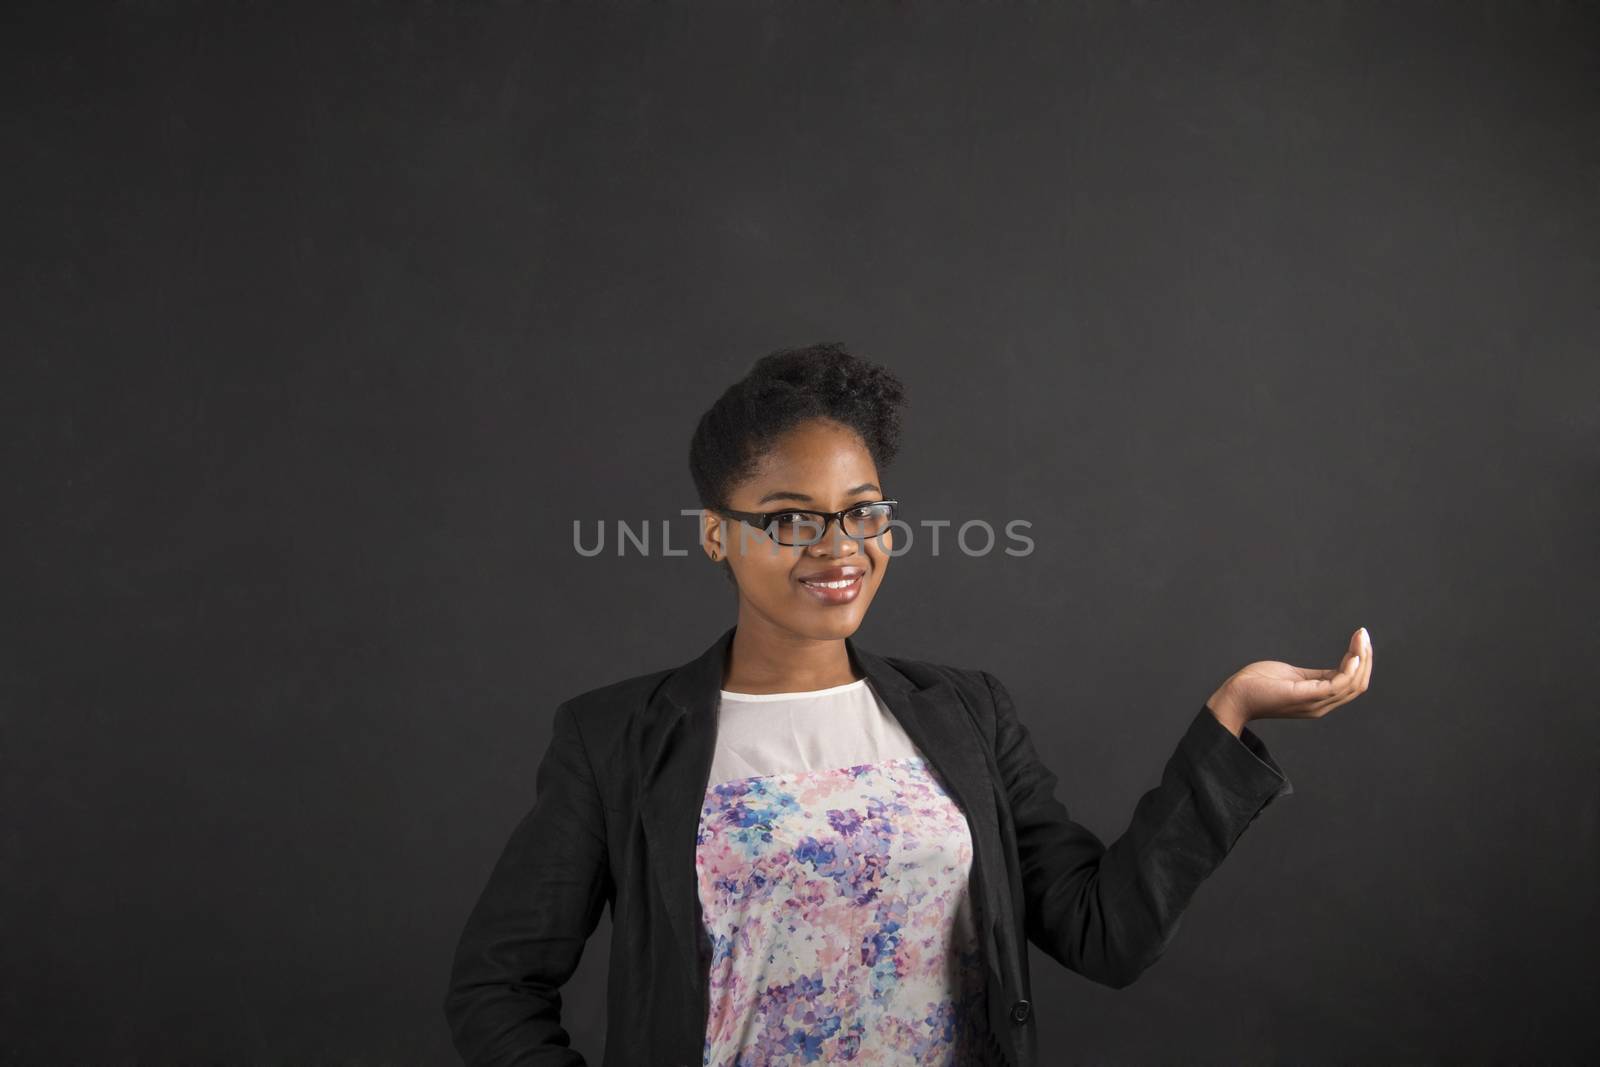 African woman holding hand out on blackboard background by alistaircotton